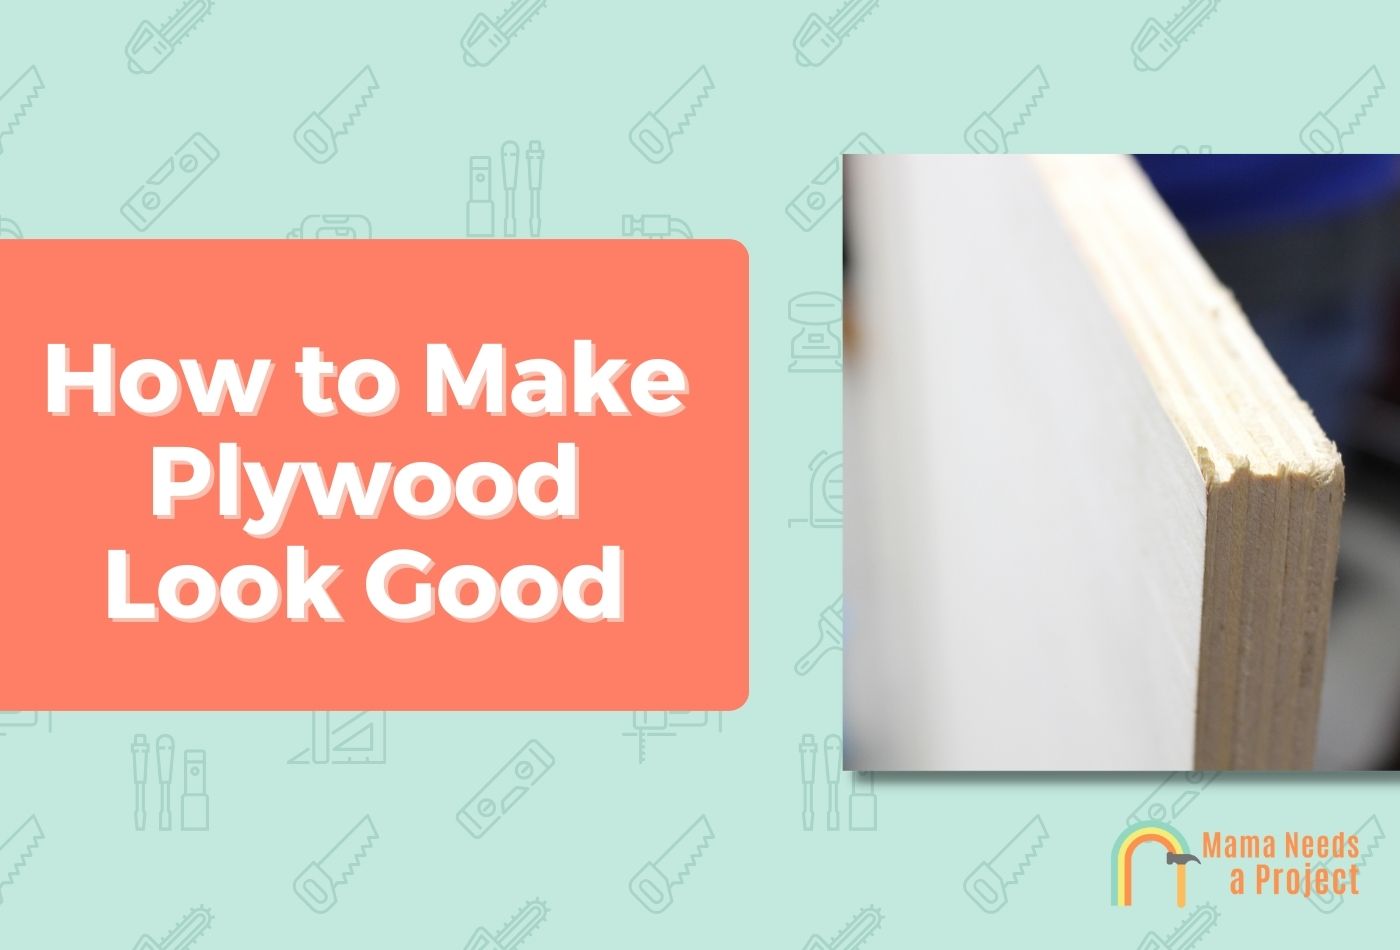 How to Make Plywood Look Good